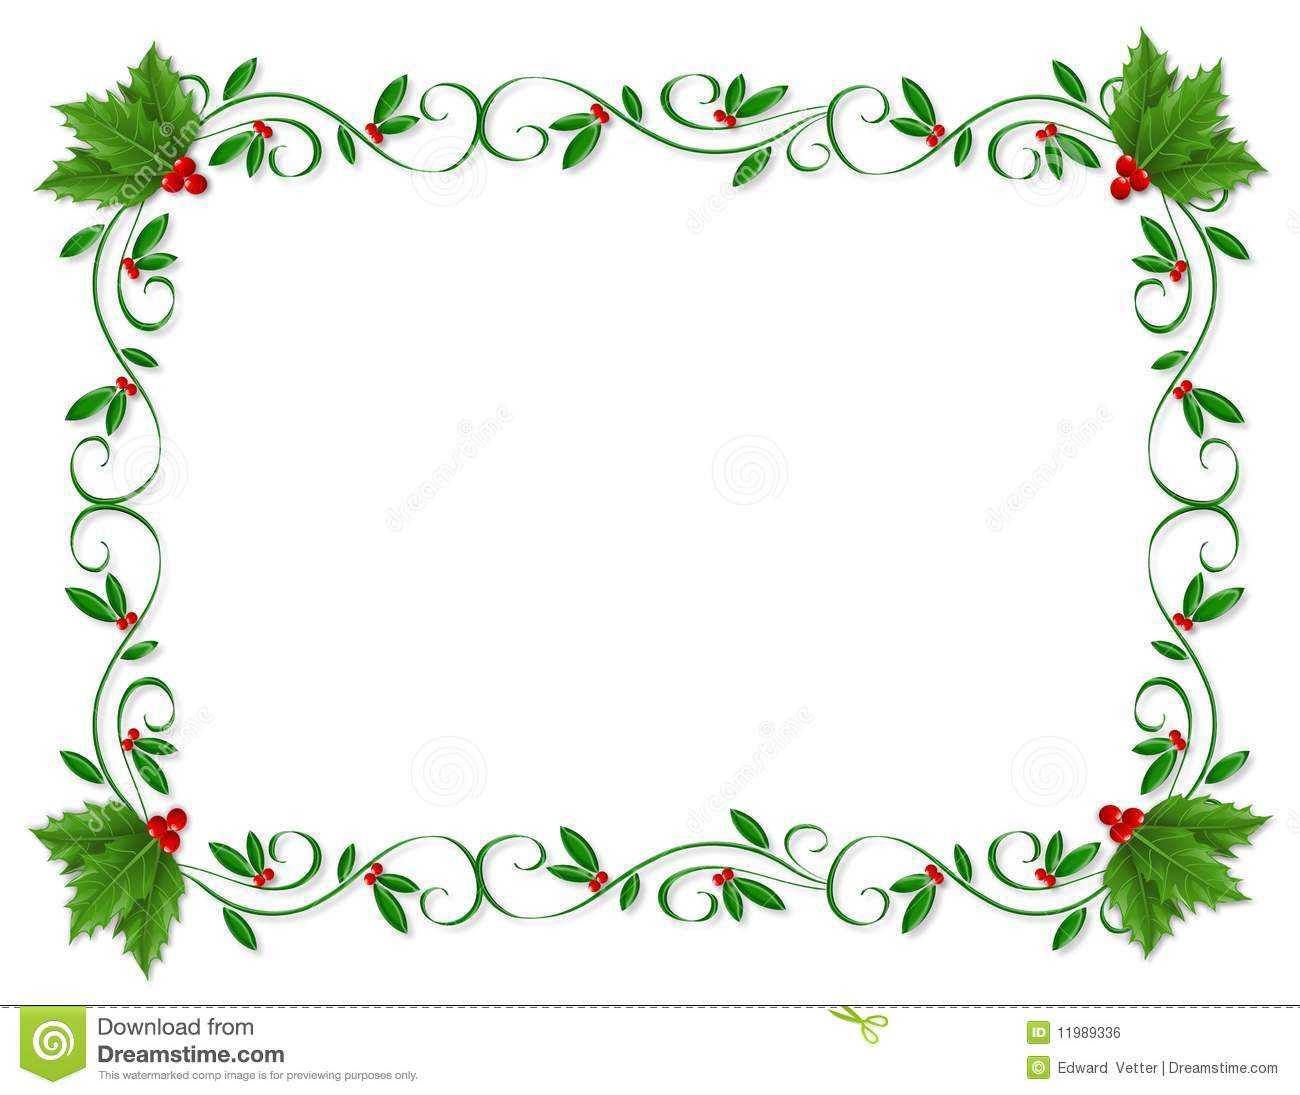 2088 Christmas Borders Templates | Wiring Library Intended For Christmas Border Word Template